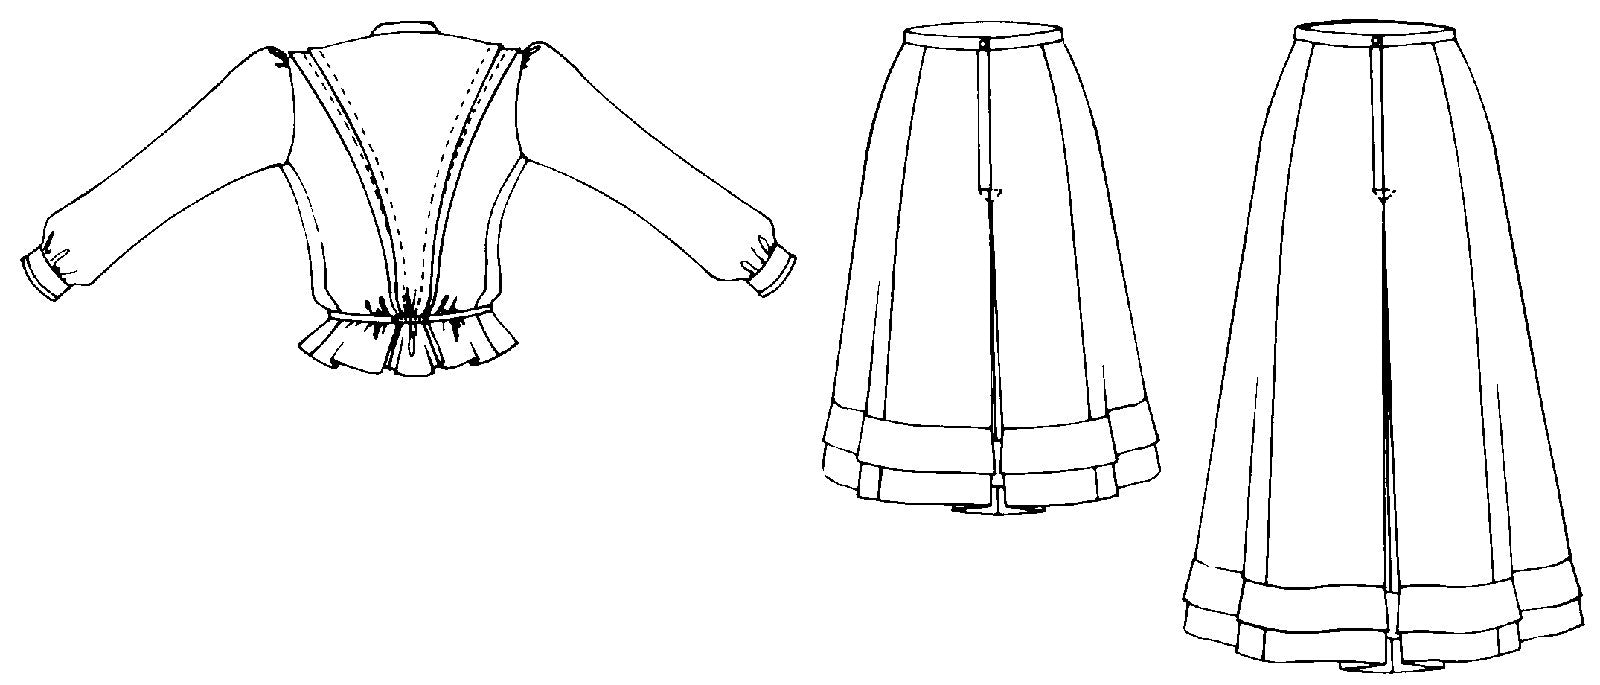 Black and white flat-line pattern drawing of back view of Shirtwaist, and short and long skirts.